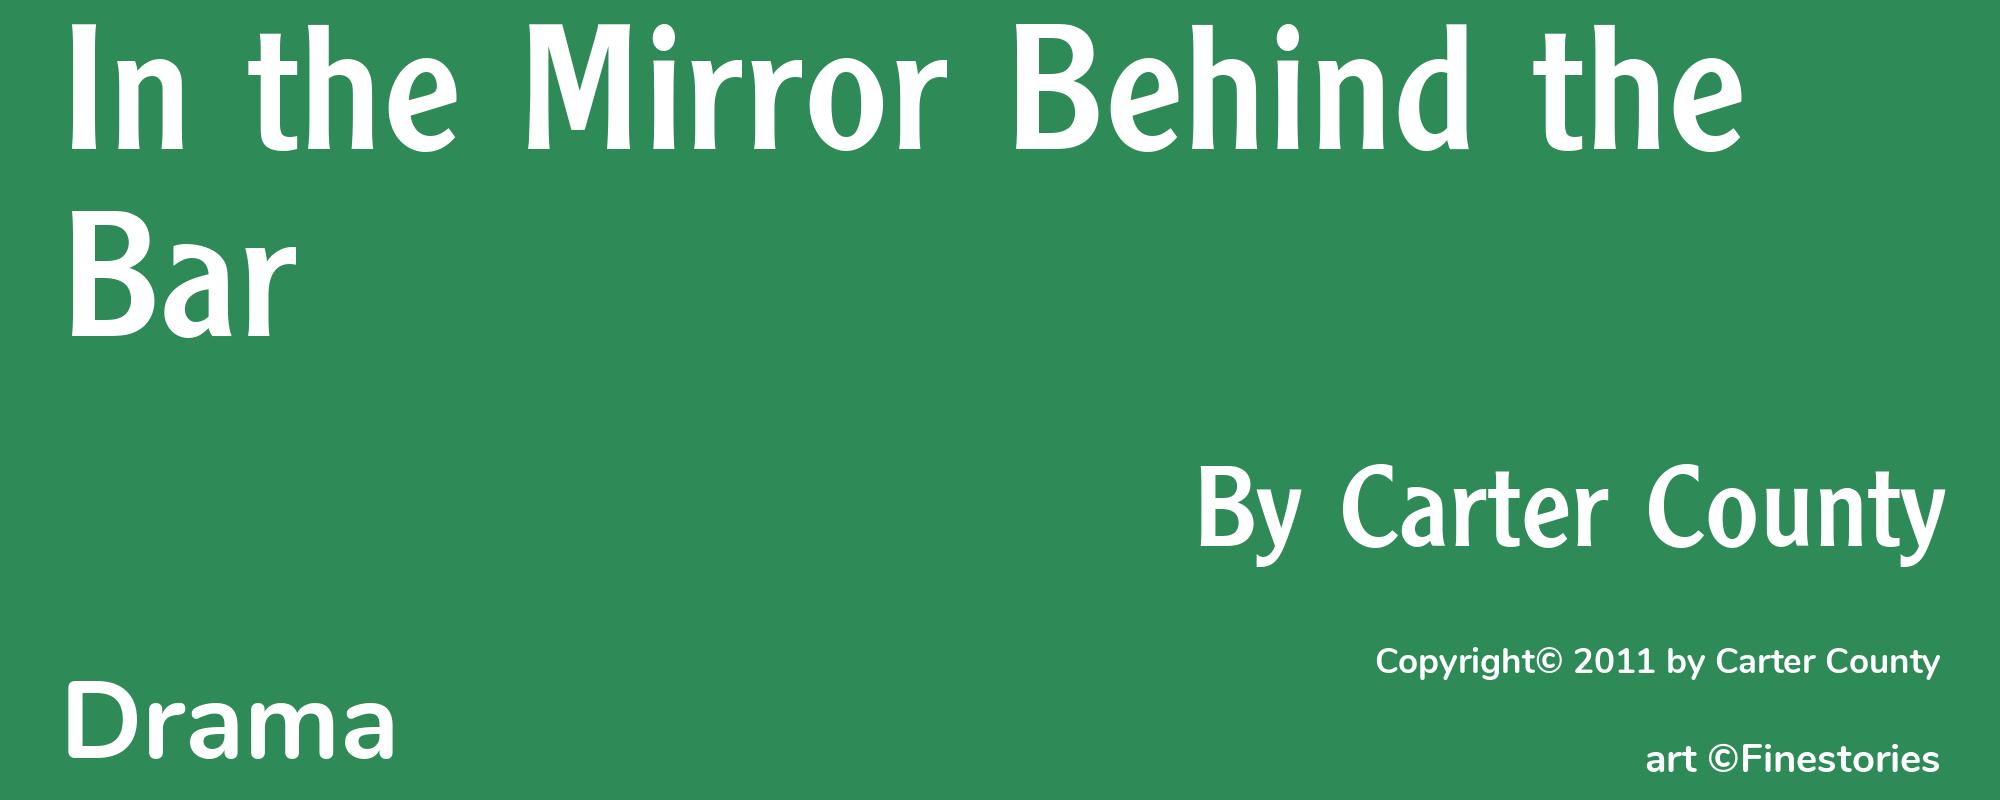 In the Mirror Behind the Bar - Cover